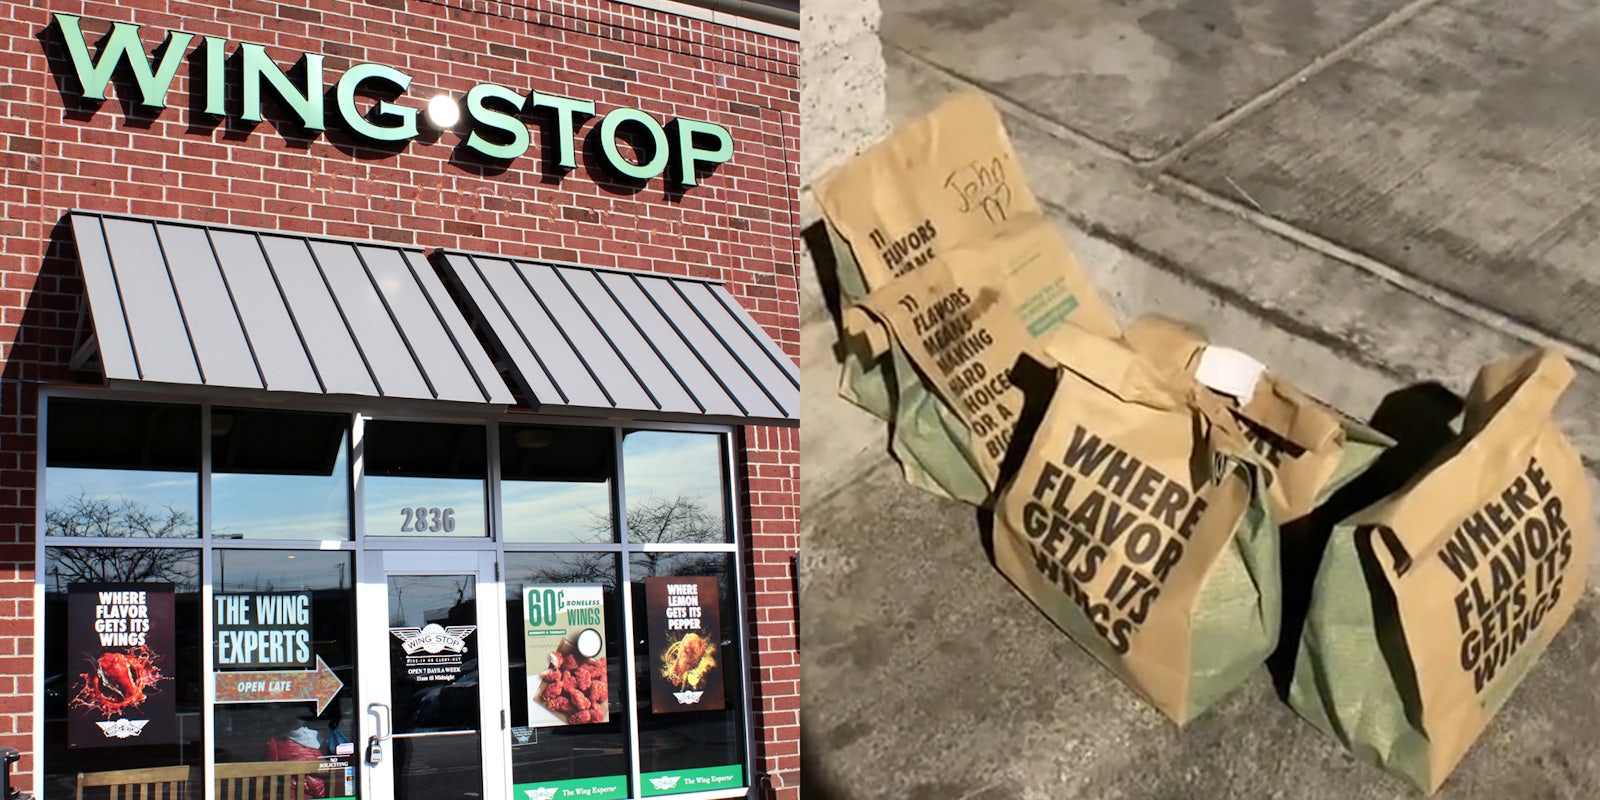 Wing Stop (l) bags of Wing Stop food on ground in parking lot (r)